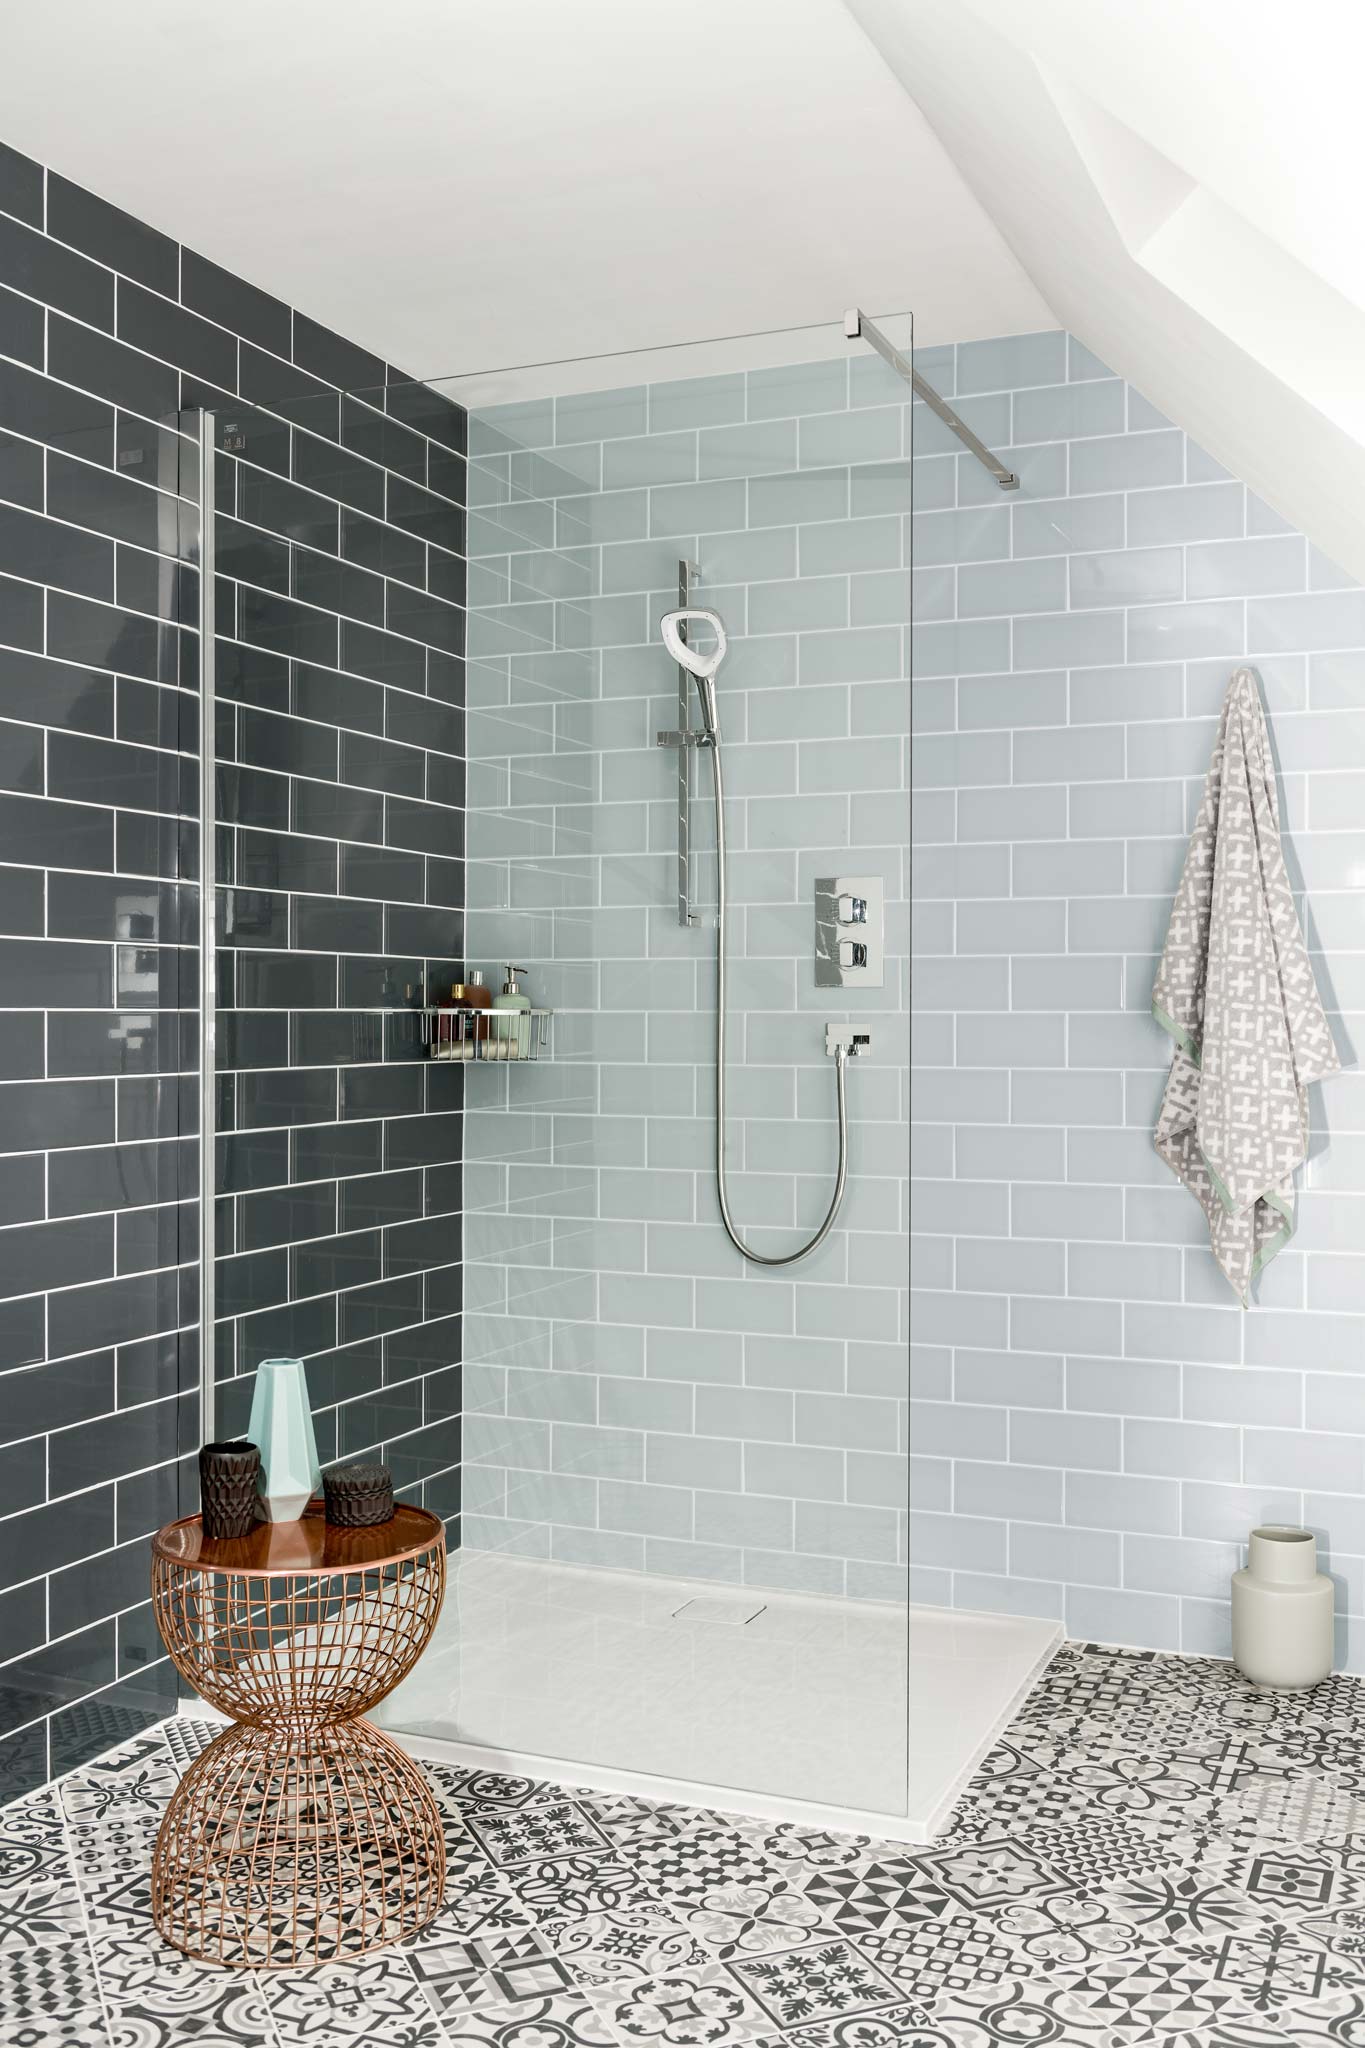 A shower tray and screen with tiles walls and floor in an attic under a sloping roof